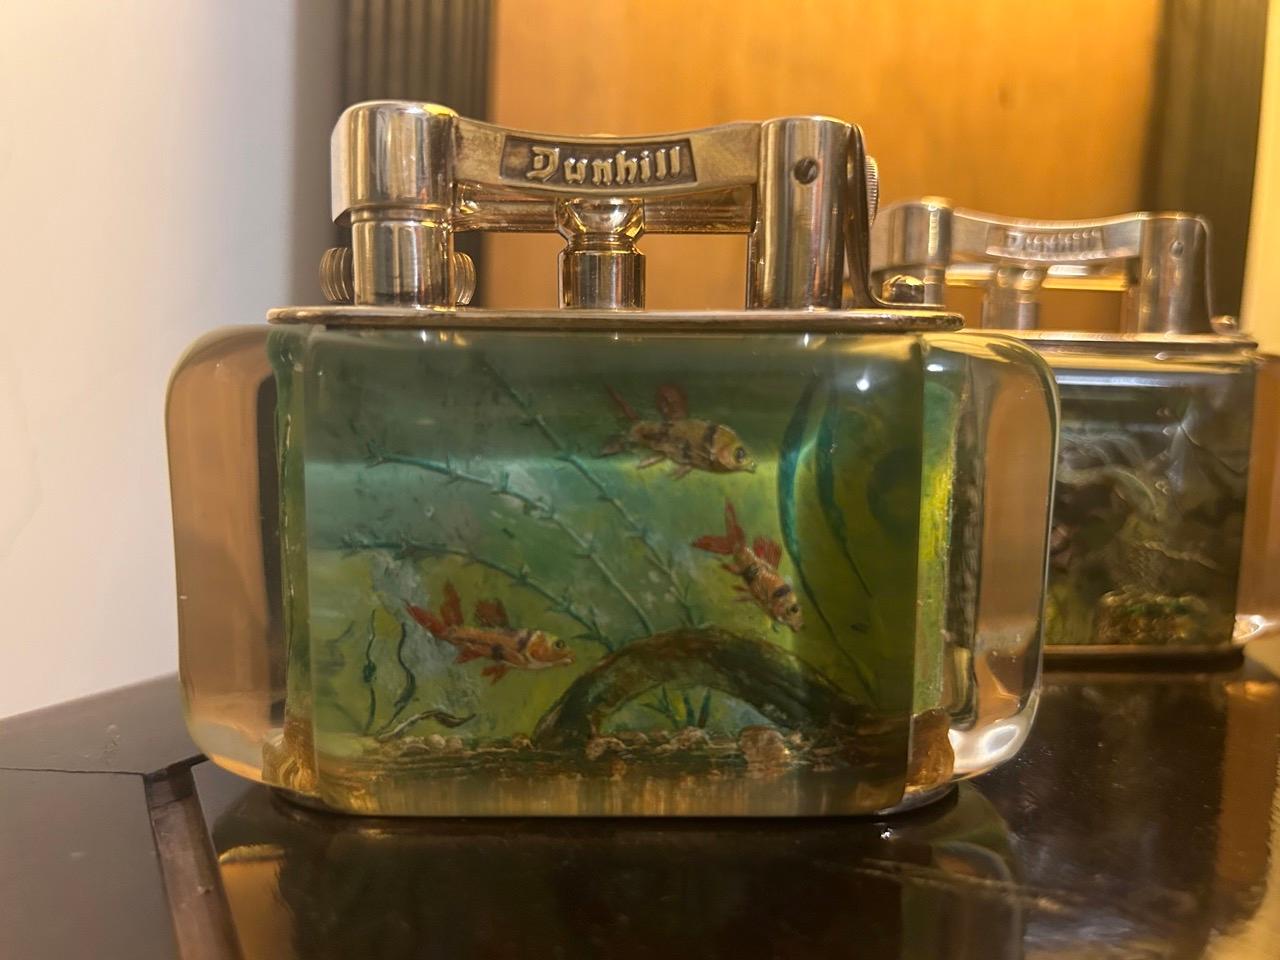 

Lot of 5 Rare 1950s Half-Giant Dunhill Aquarium table lighters (made in England) 

Each of these lighters are very rare and unique as they were hand carved and painted and no one look exactly similar.

Ben Shillingford (1904-2000) commenced to